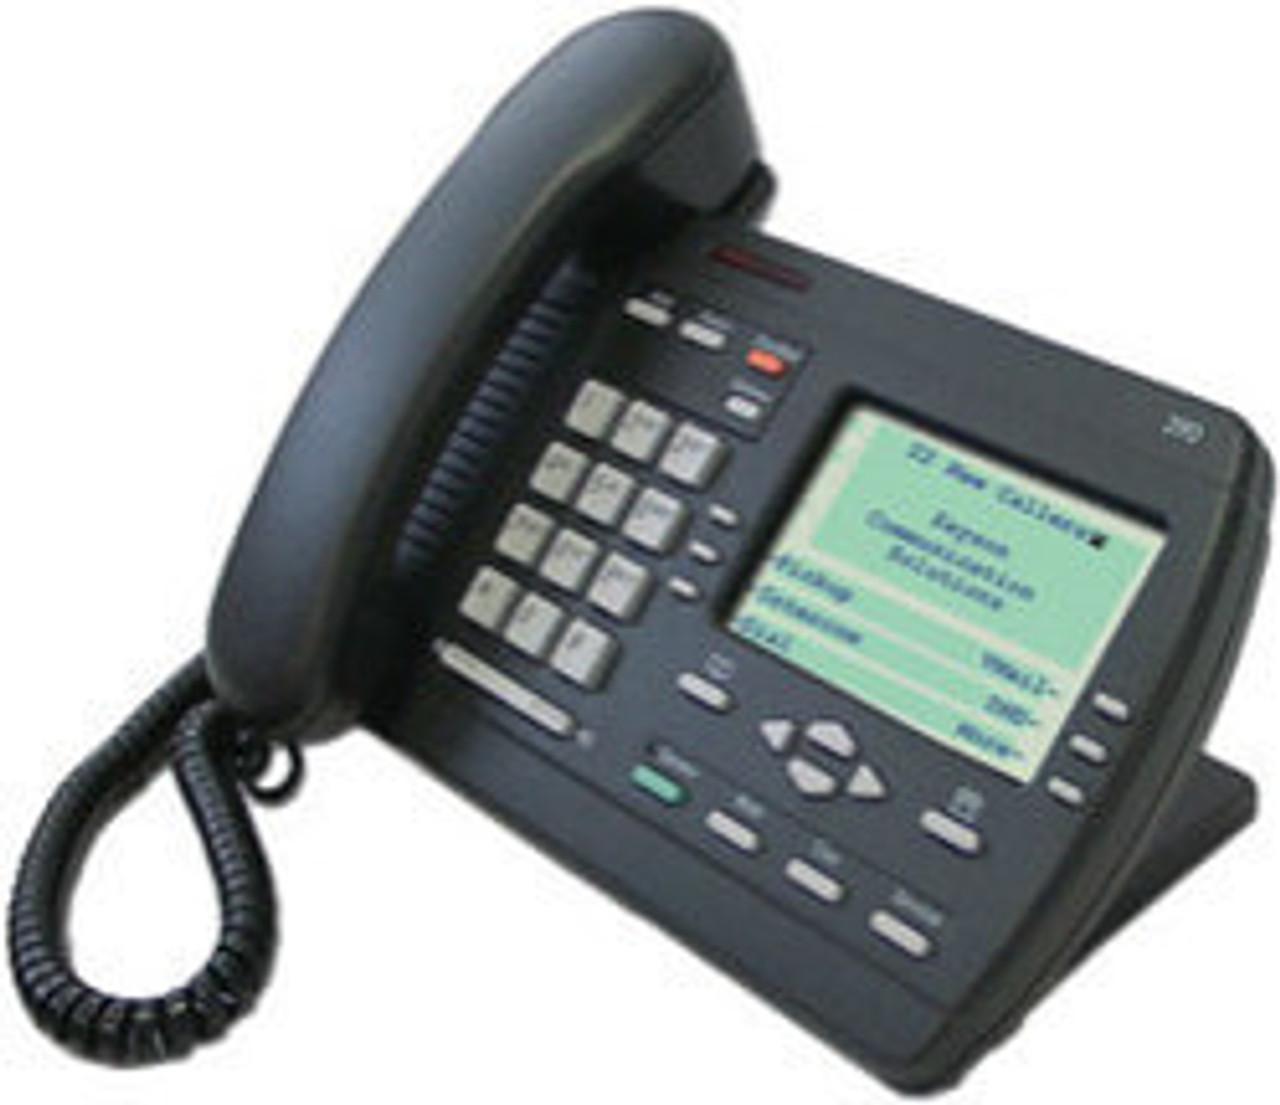 Aastra Powertouch 390 Screenphone